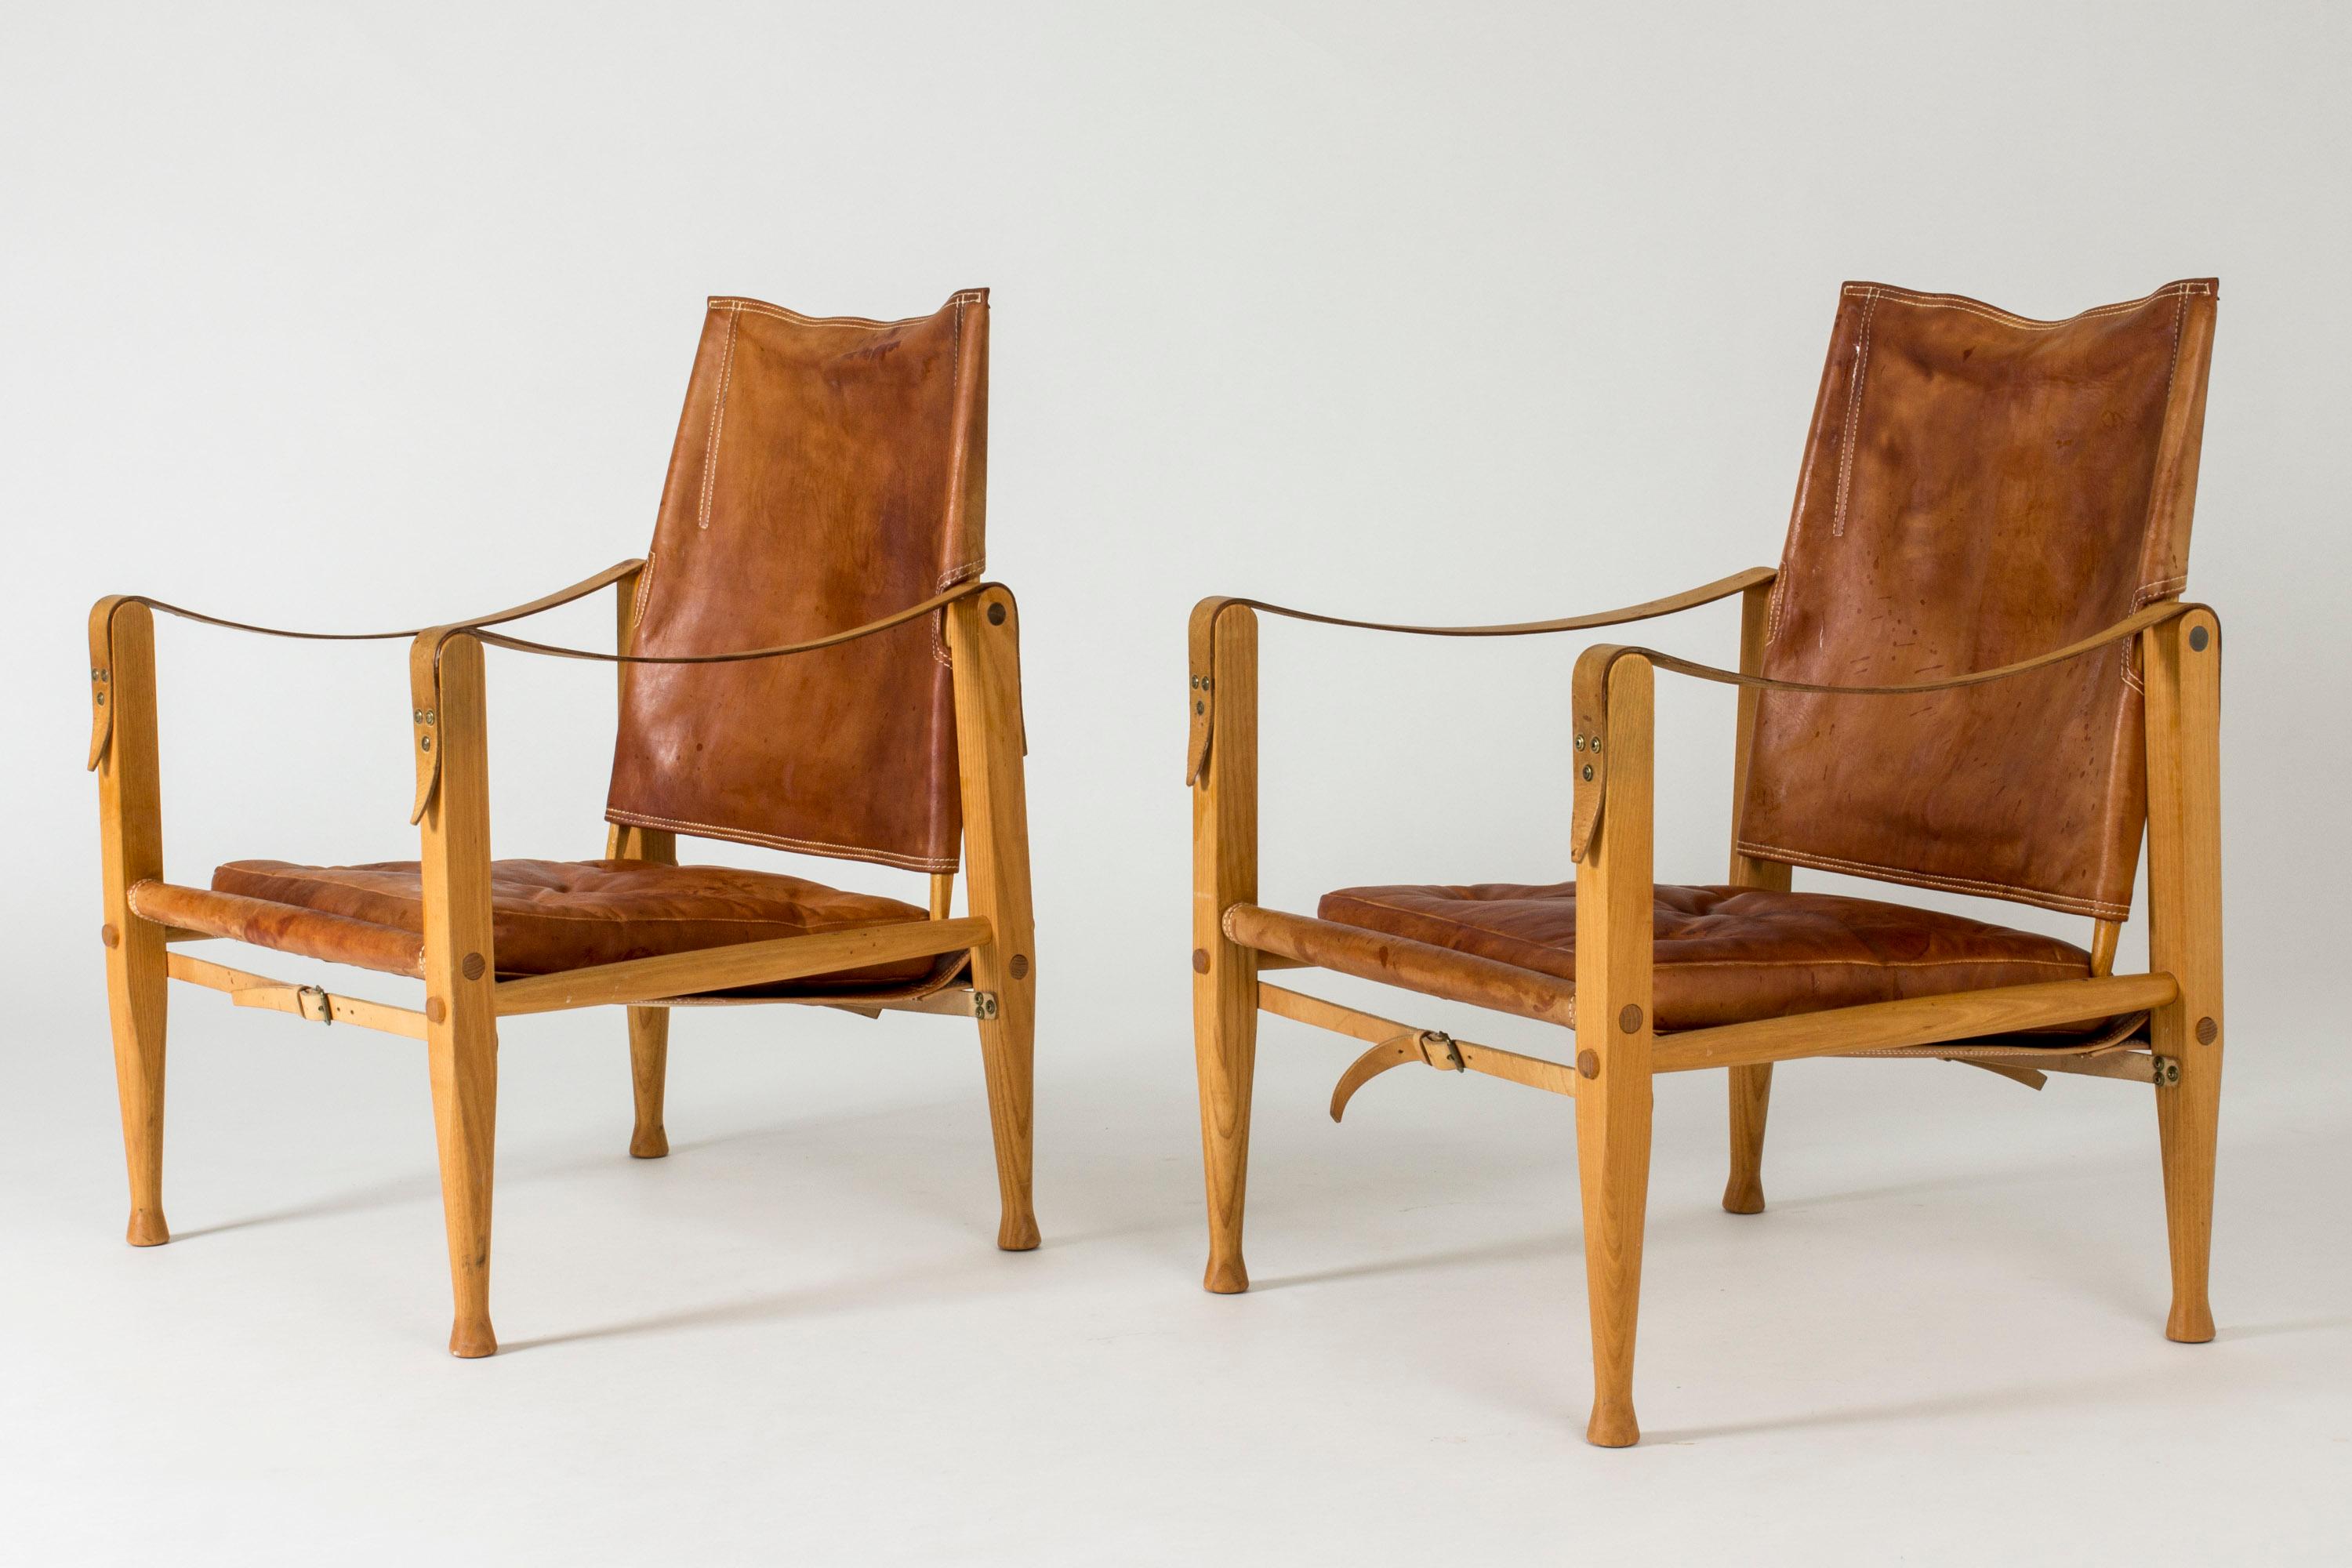 Pair of amazing “Safari” lounge chairs by Kaare Klint. Oak frame with nicely tapering legs, cognac leather with heavy patina. Very nice leather details.